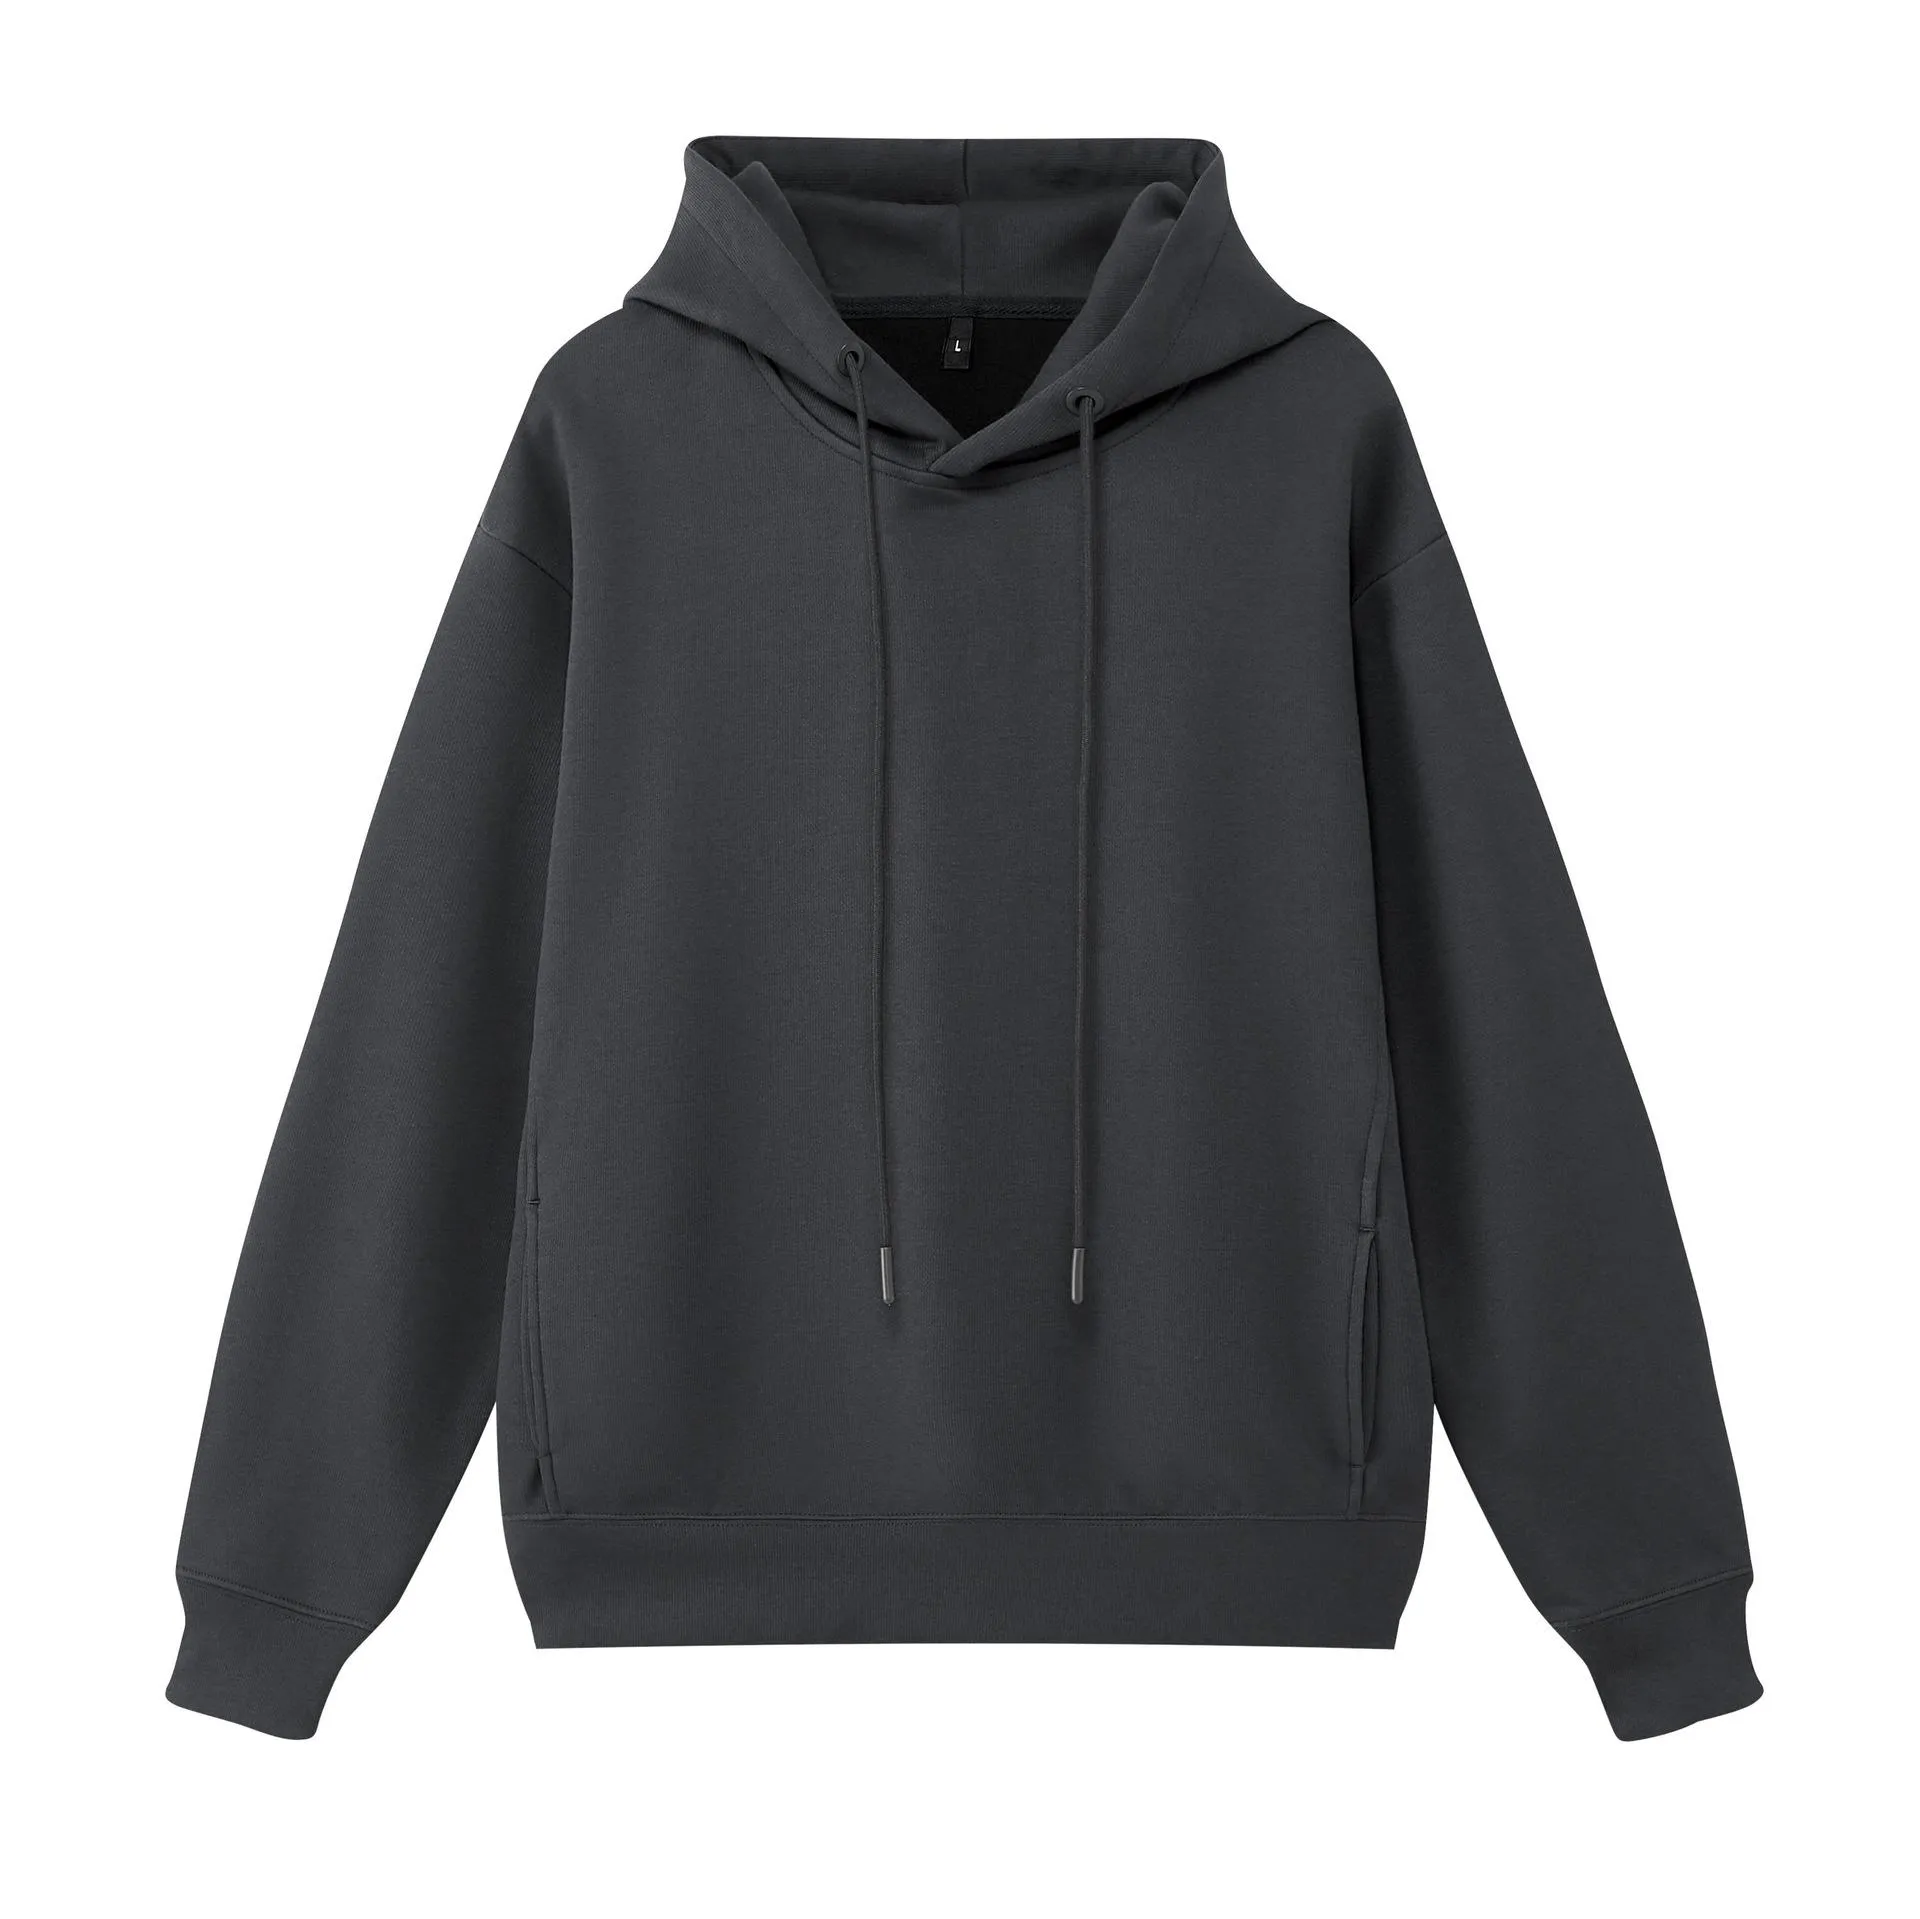 heavy baggy 380g off-shoulder hoodie for men autumn and winter long sleeved student pullover for women